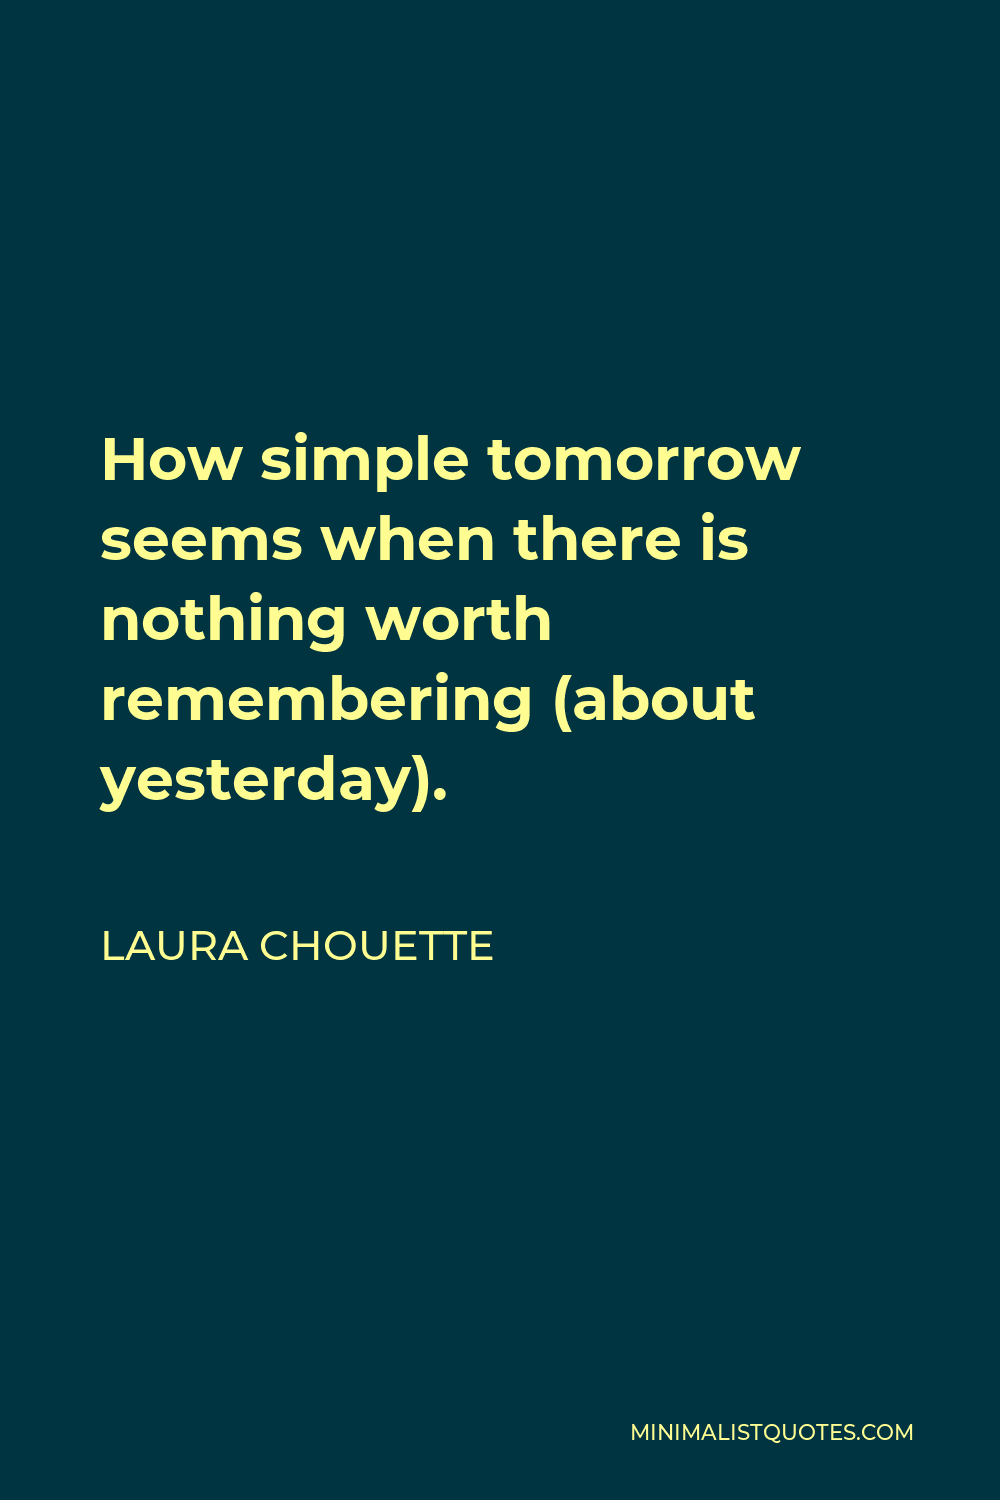 Laura Chouette Quote - How simple tomorrow seems when there is nothing worth remembering (about yesterday).